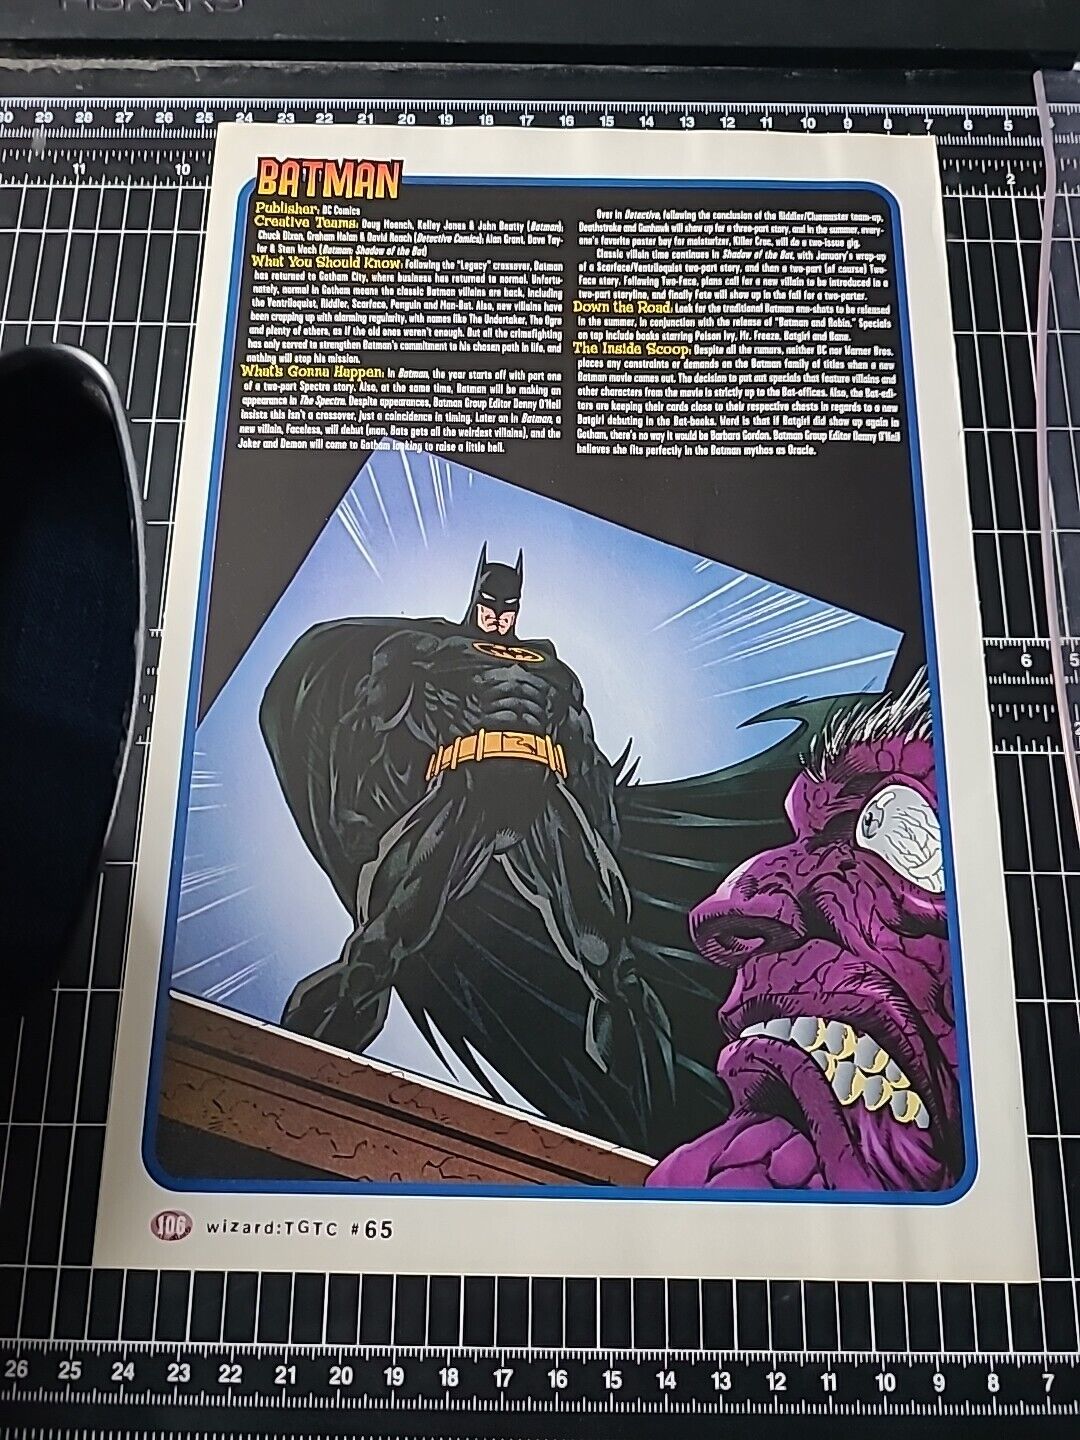 Batman Print Ad 1997 Fact Sheet 7x10 From Wizard  Great To Frame 